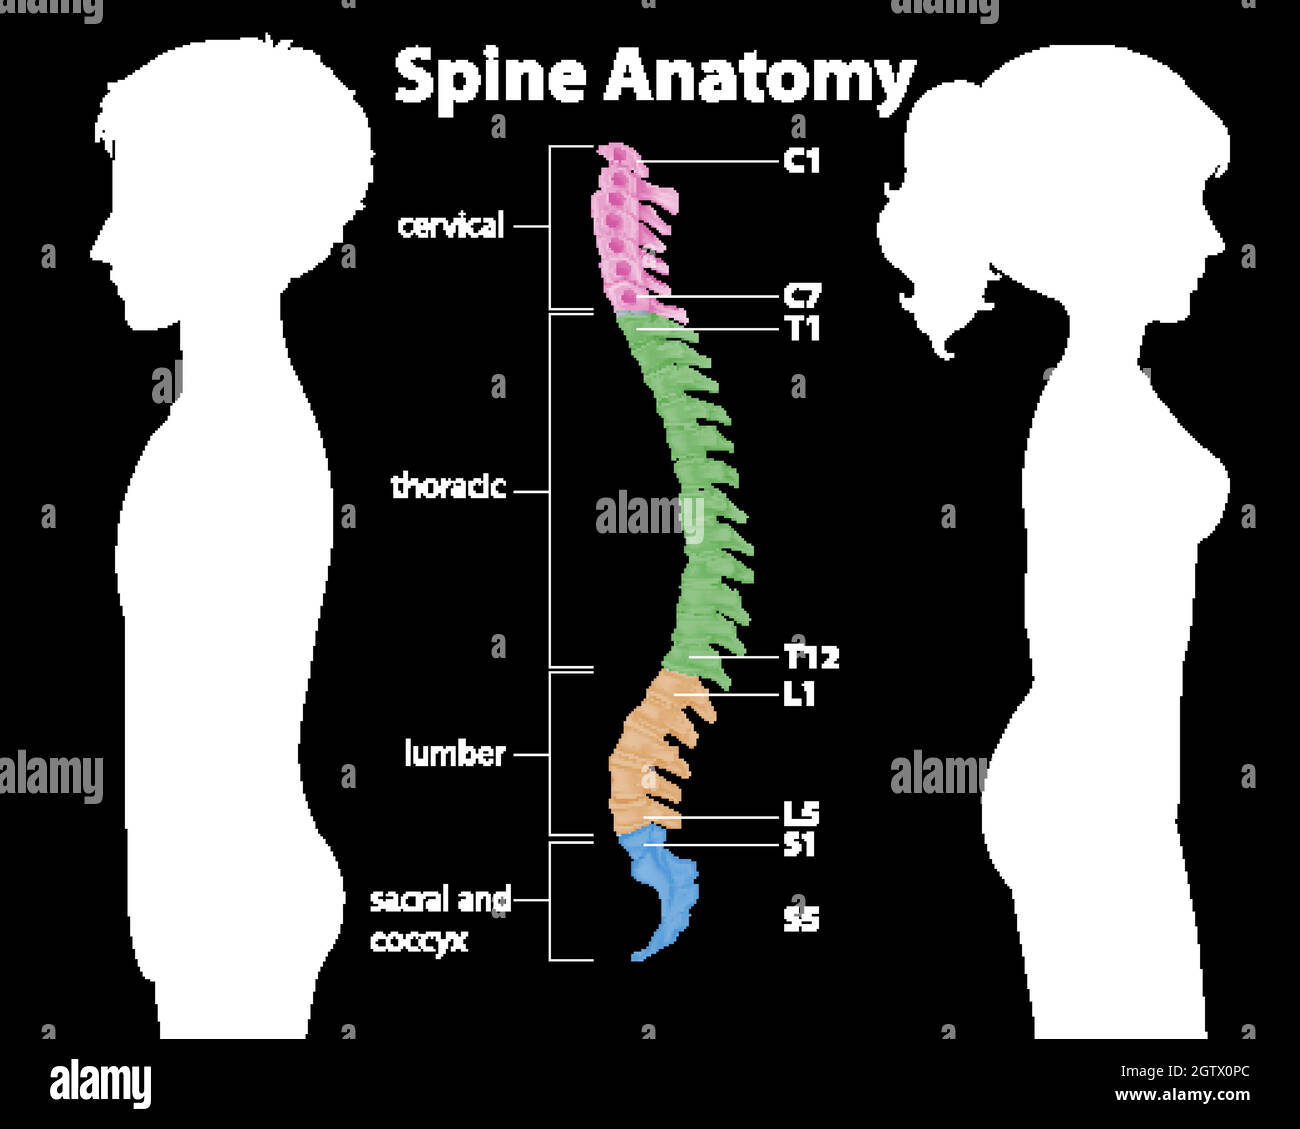 Anatomy of the spine or spinal curves infographic Stock Vector